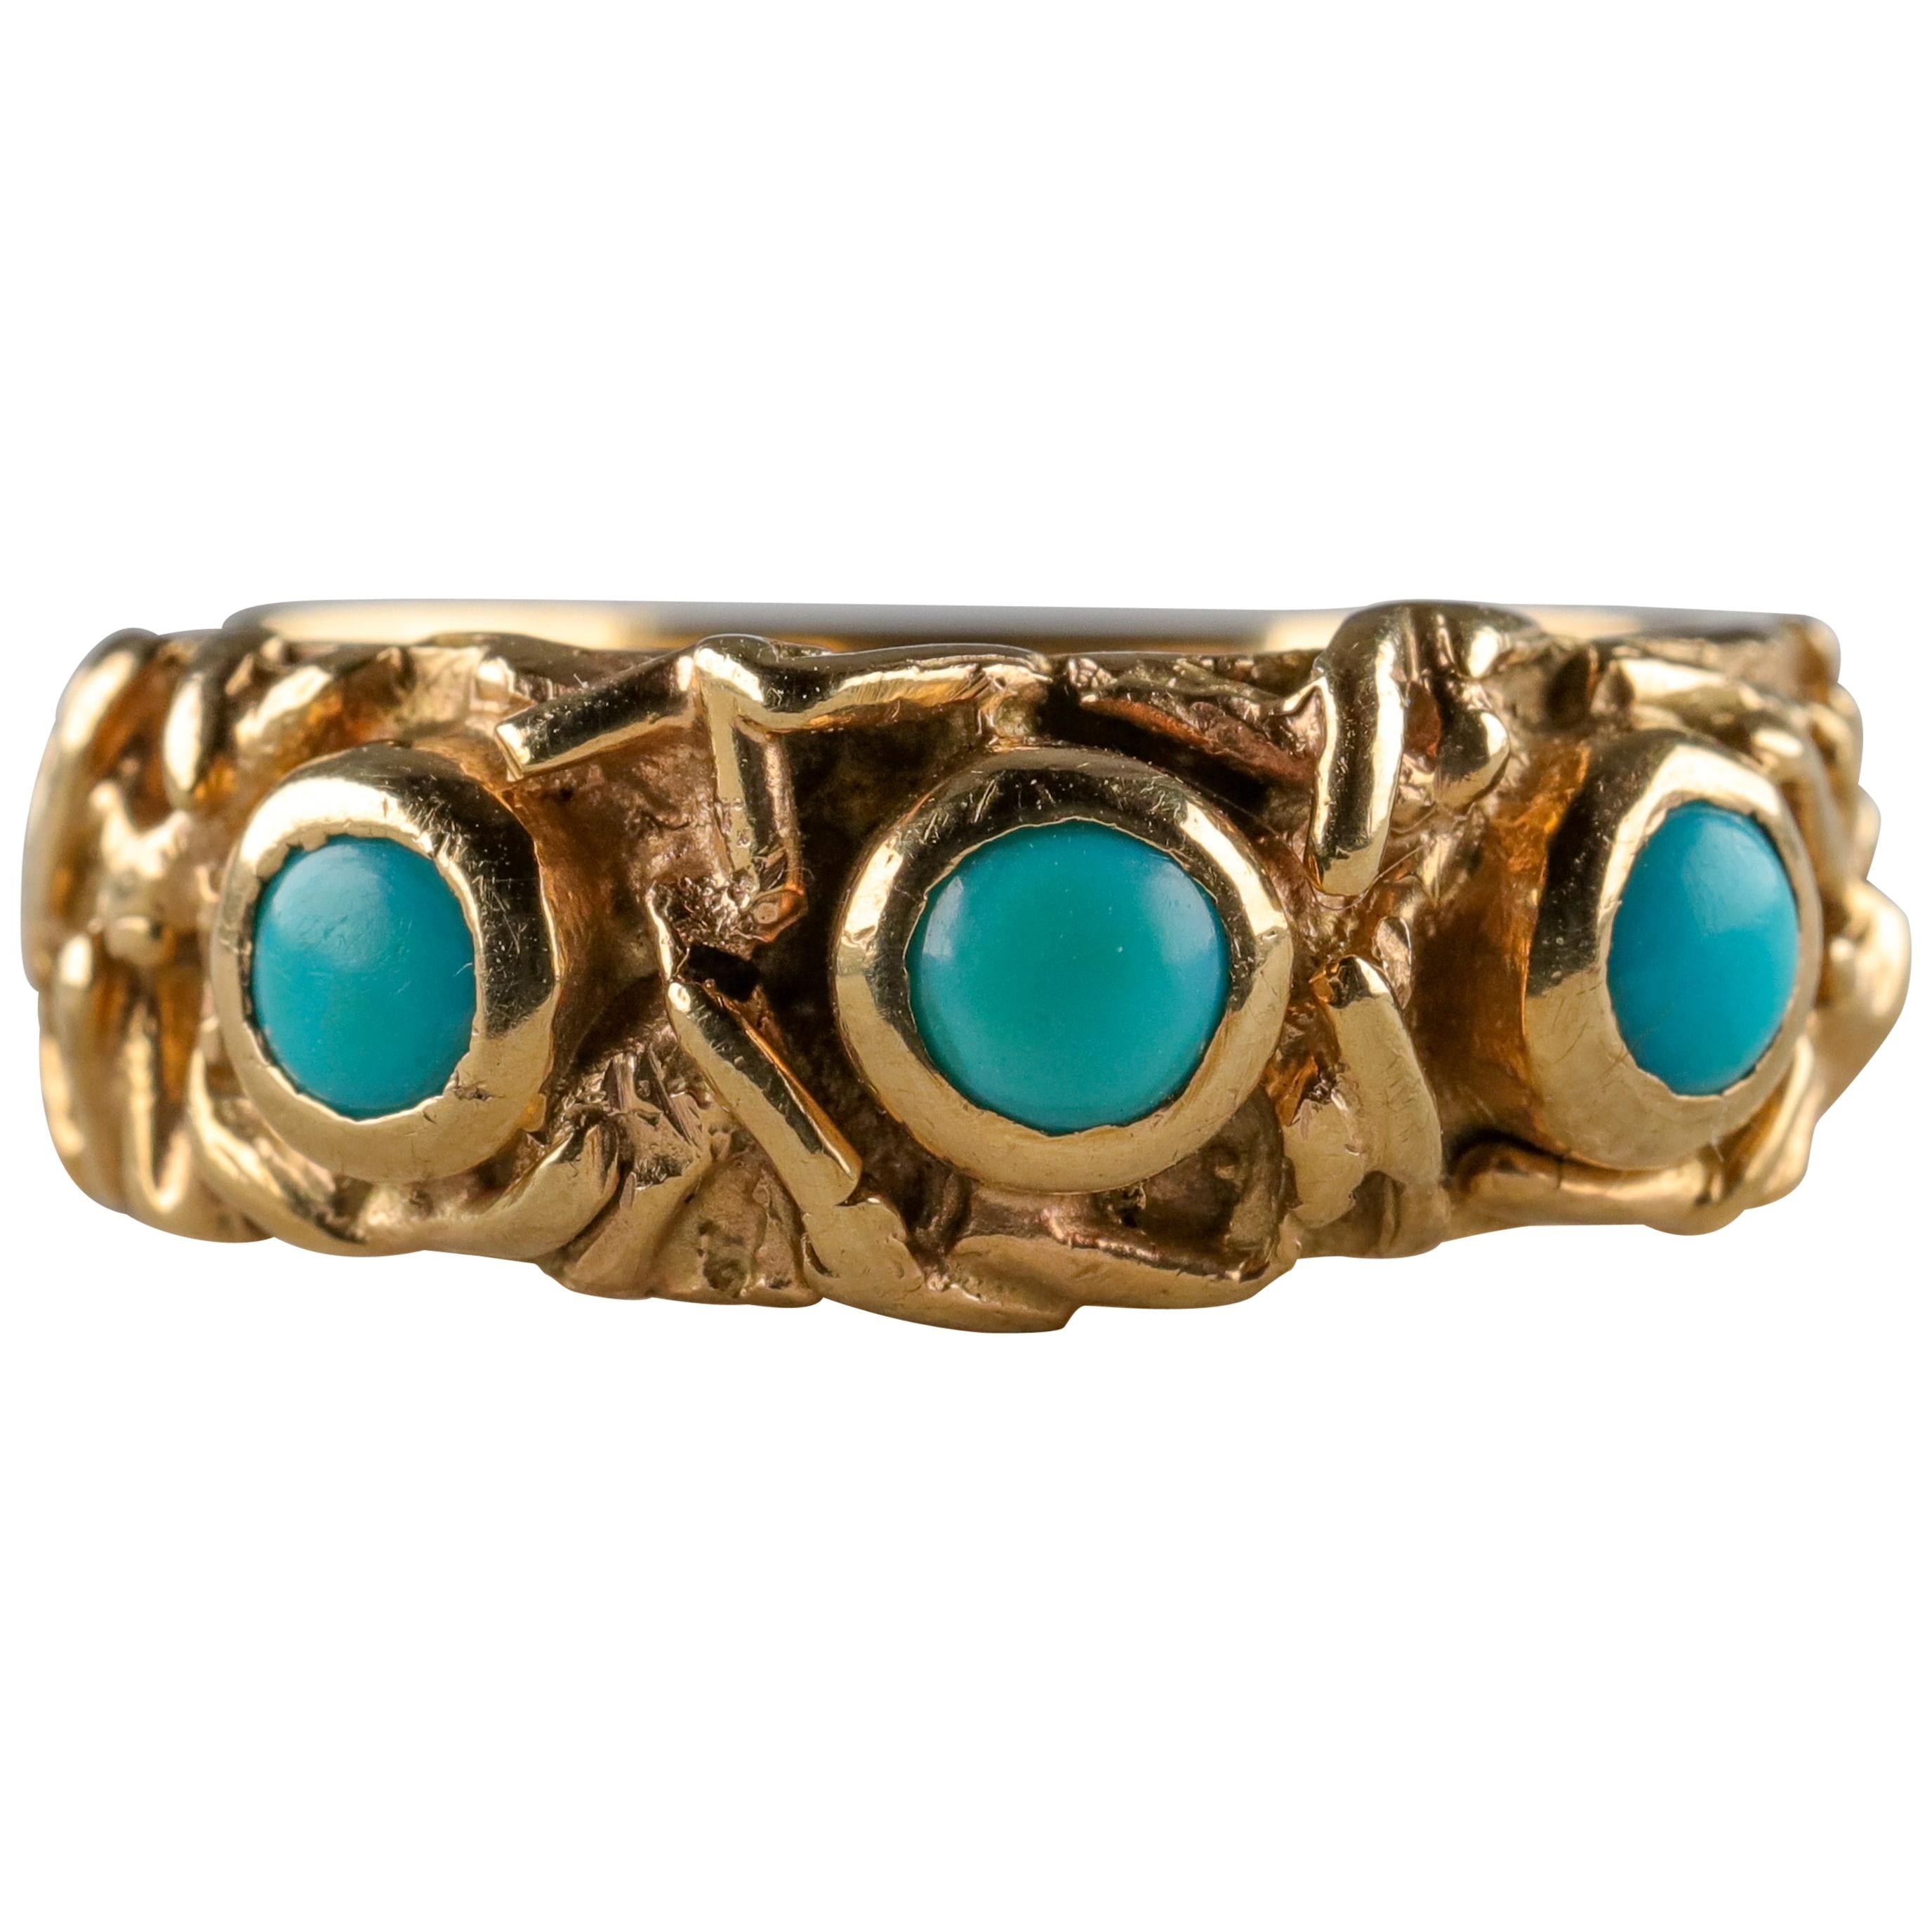 Gold Band with Persian Turquoise